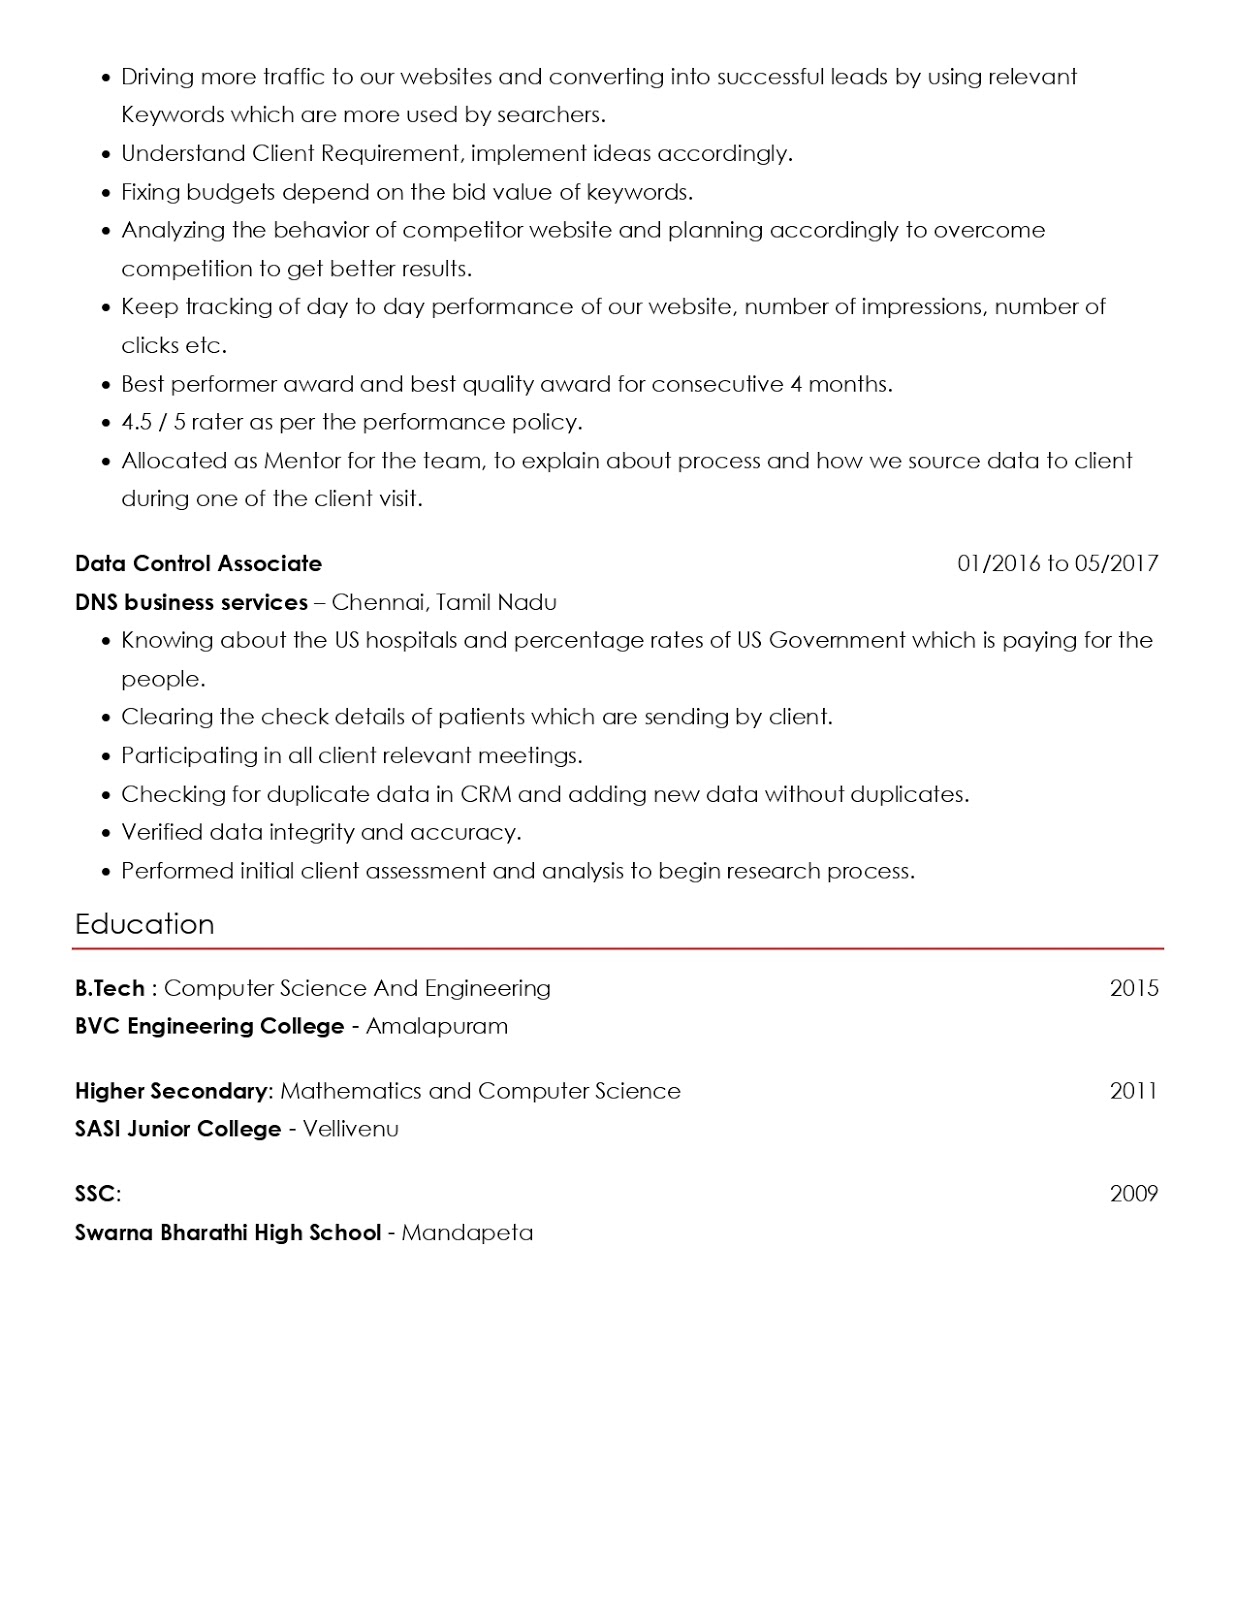 download-resume-format-in-word-for-freshers-experienced